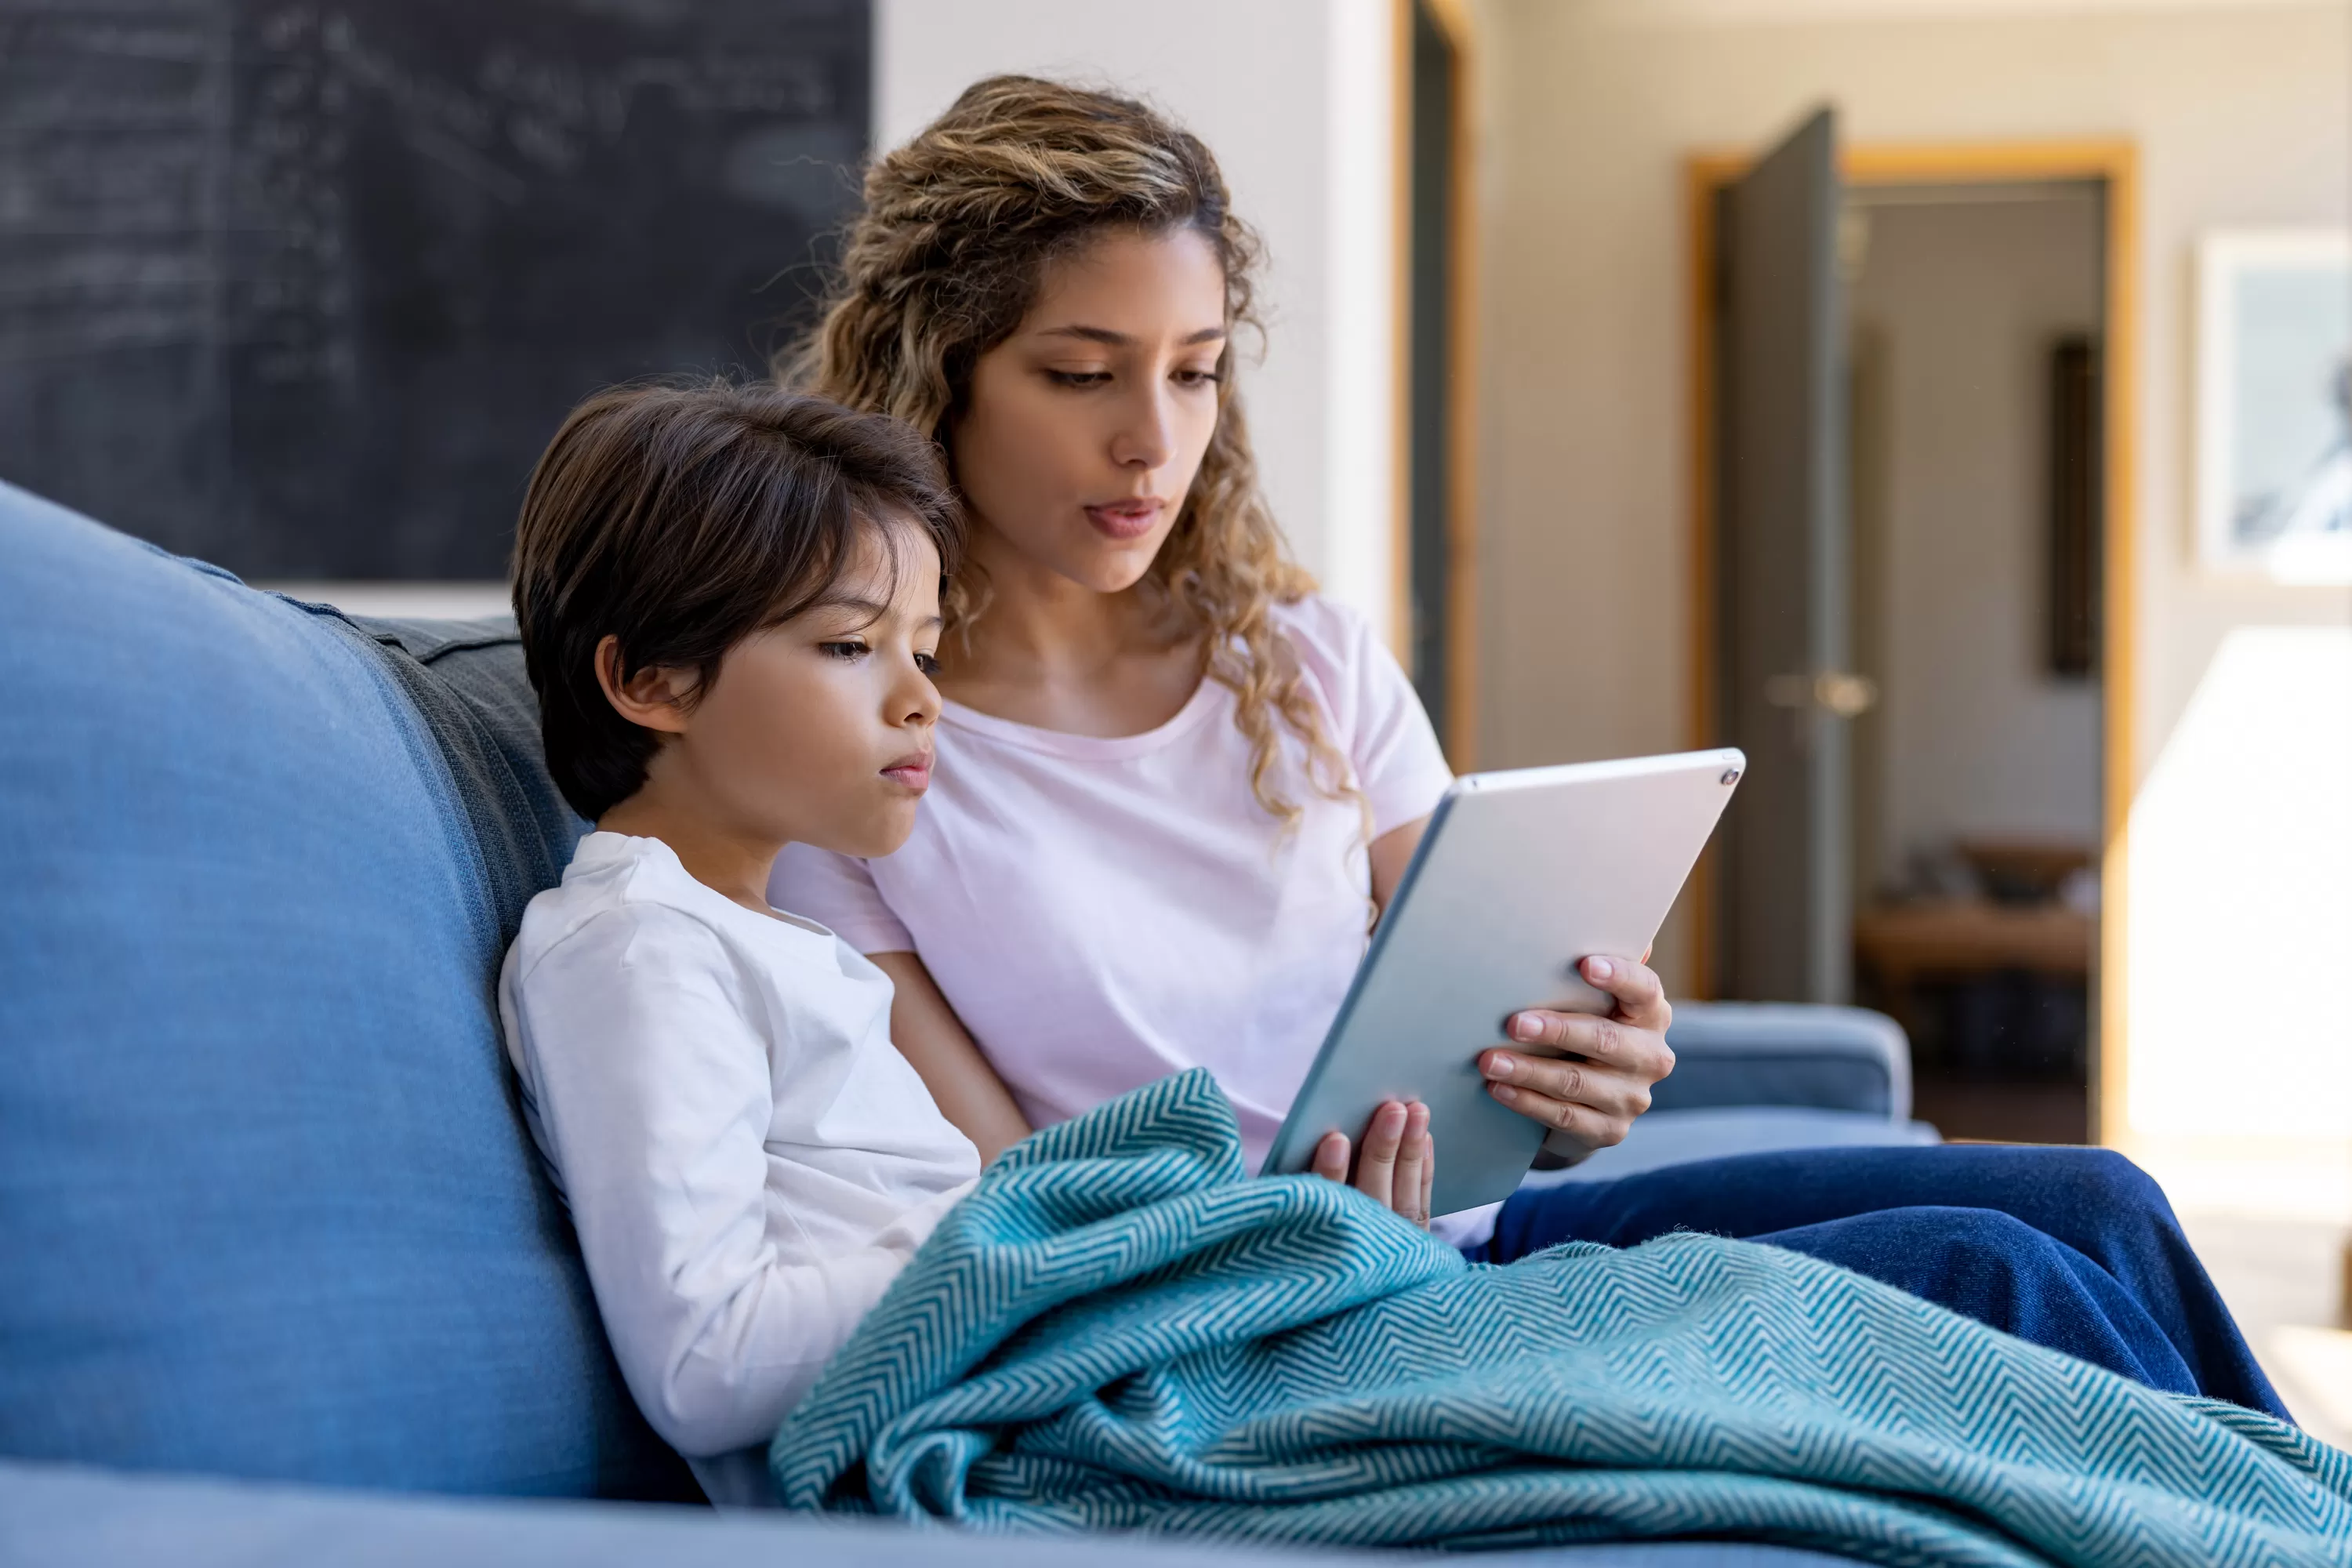 Child wrapped in blanket seated on couch next to mother holding a tablet device for both of them to view